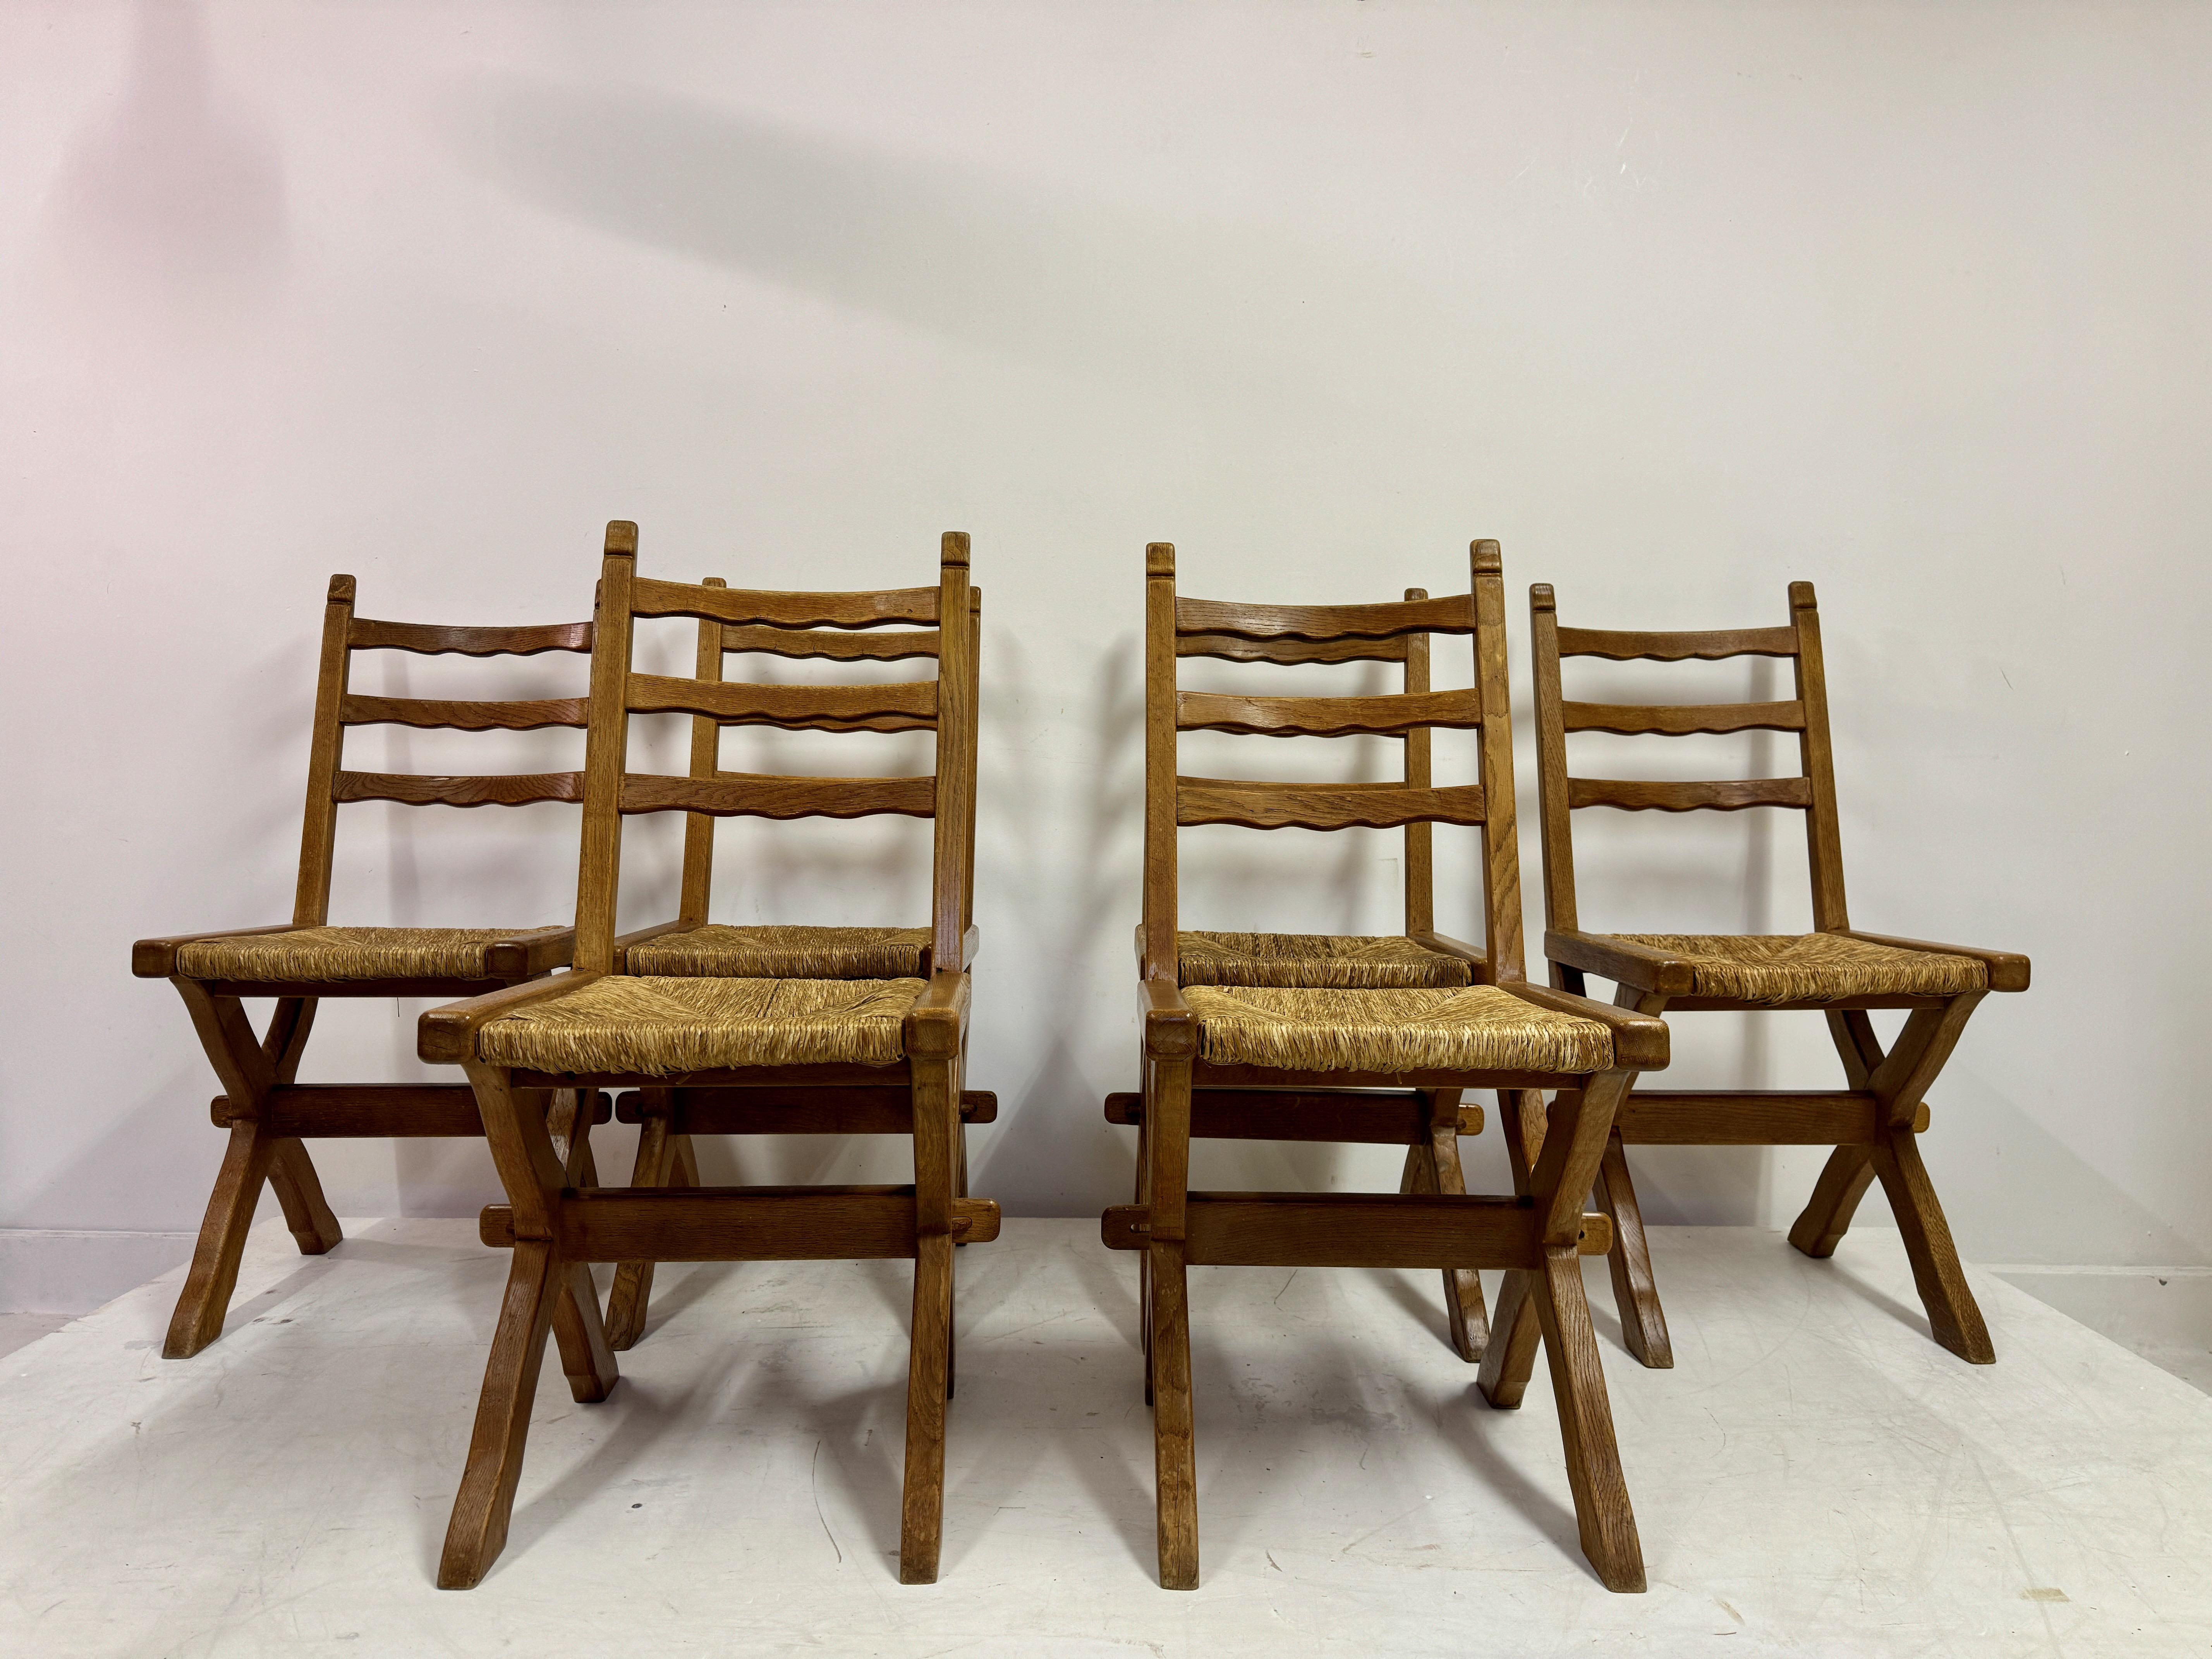 Set of six dining chairs

Oak frames

Rush seats

One chair with damage to the seat (shown in the photos)

Seat height 48cm

1960s Belgium